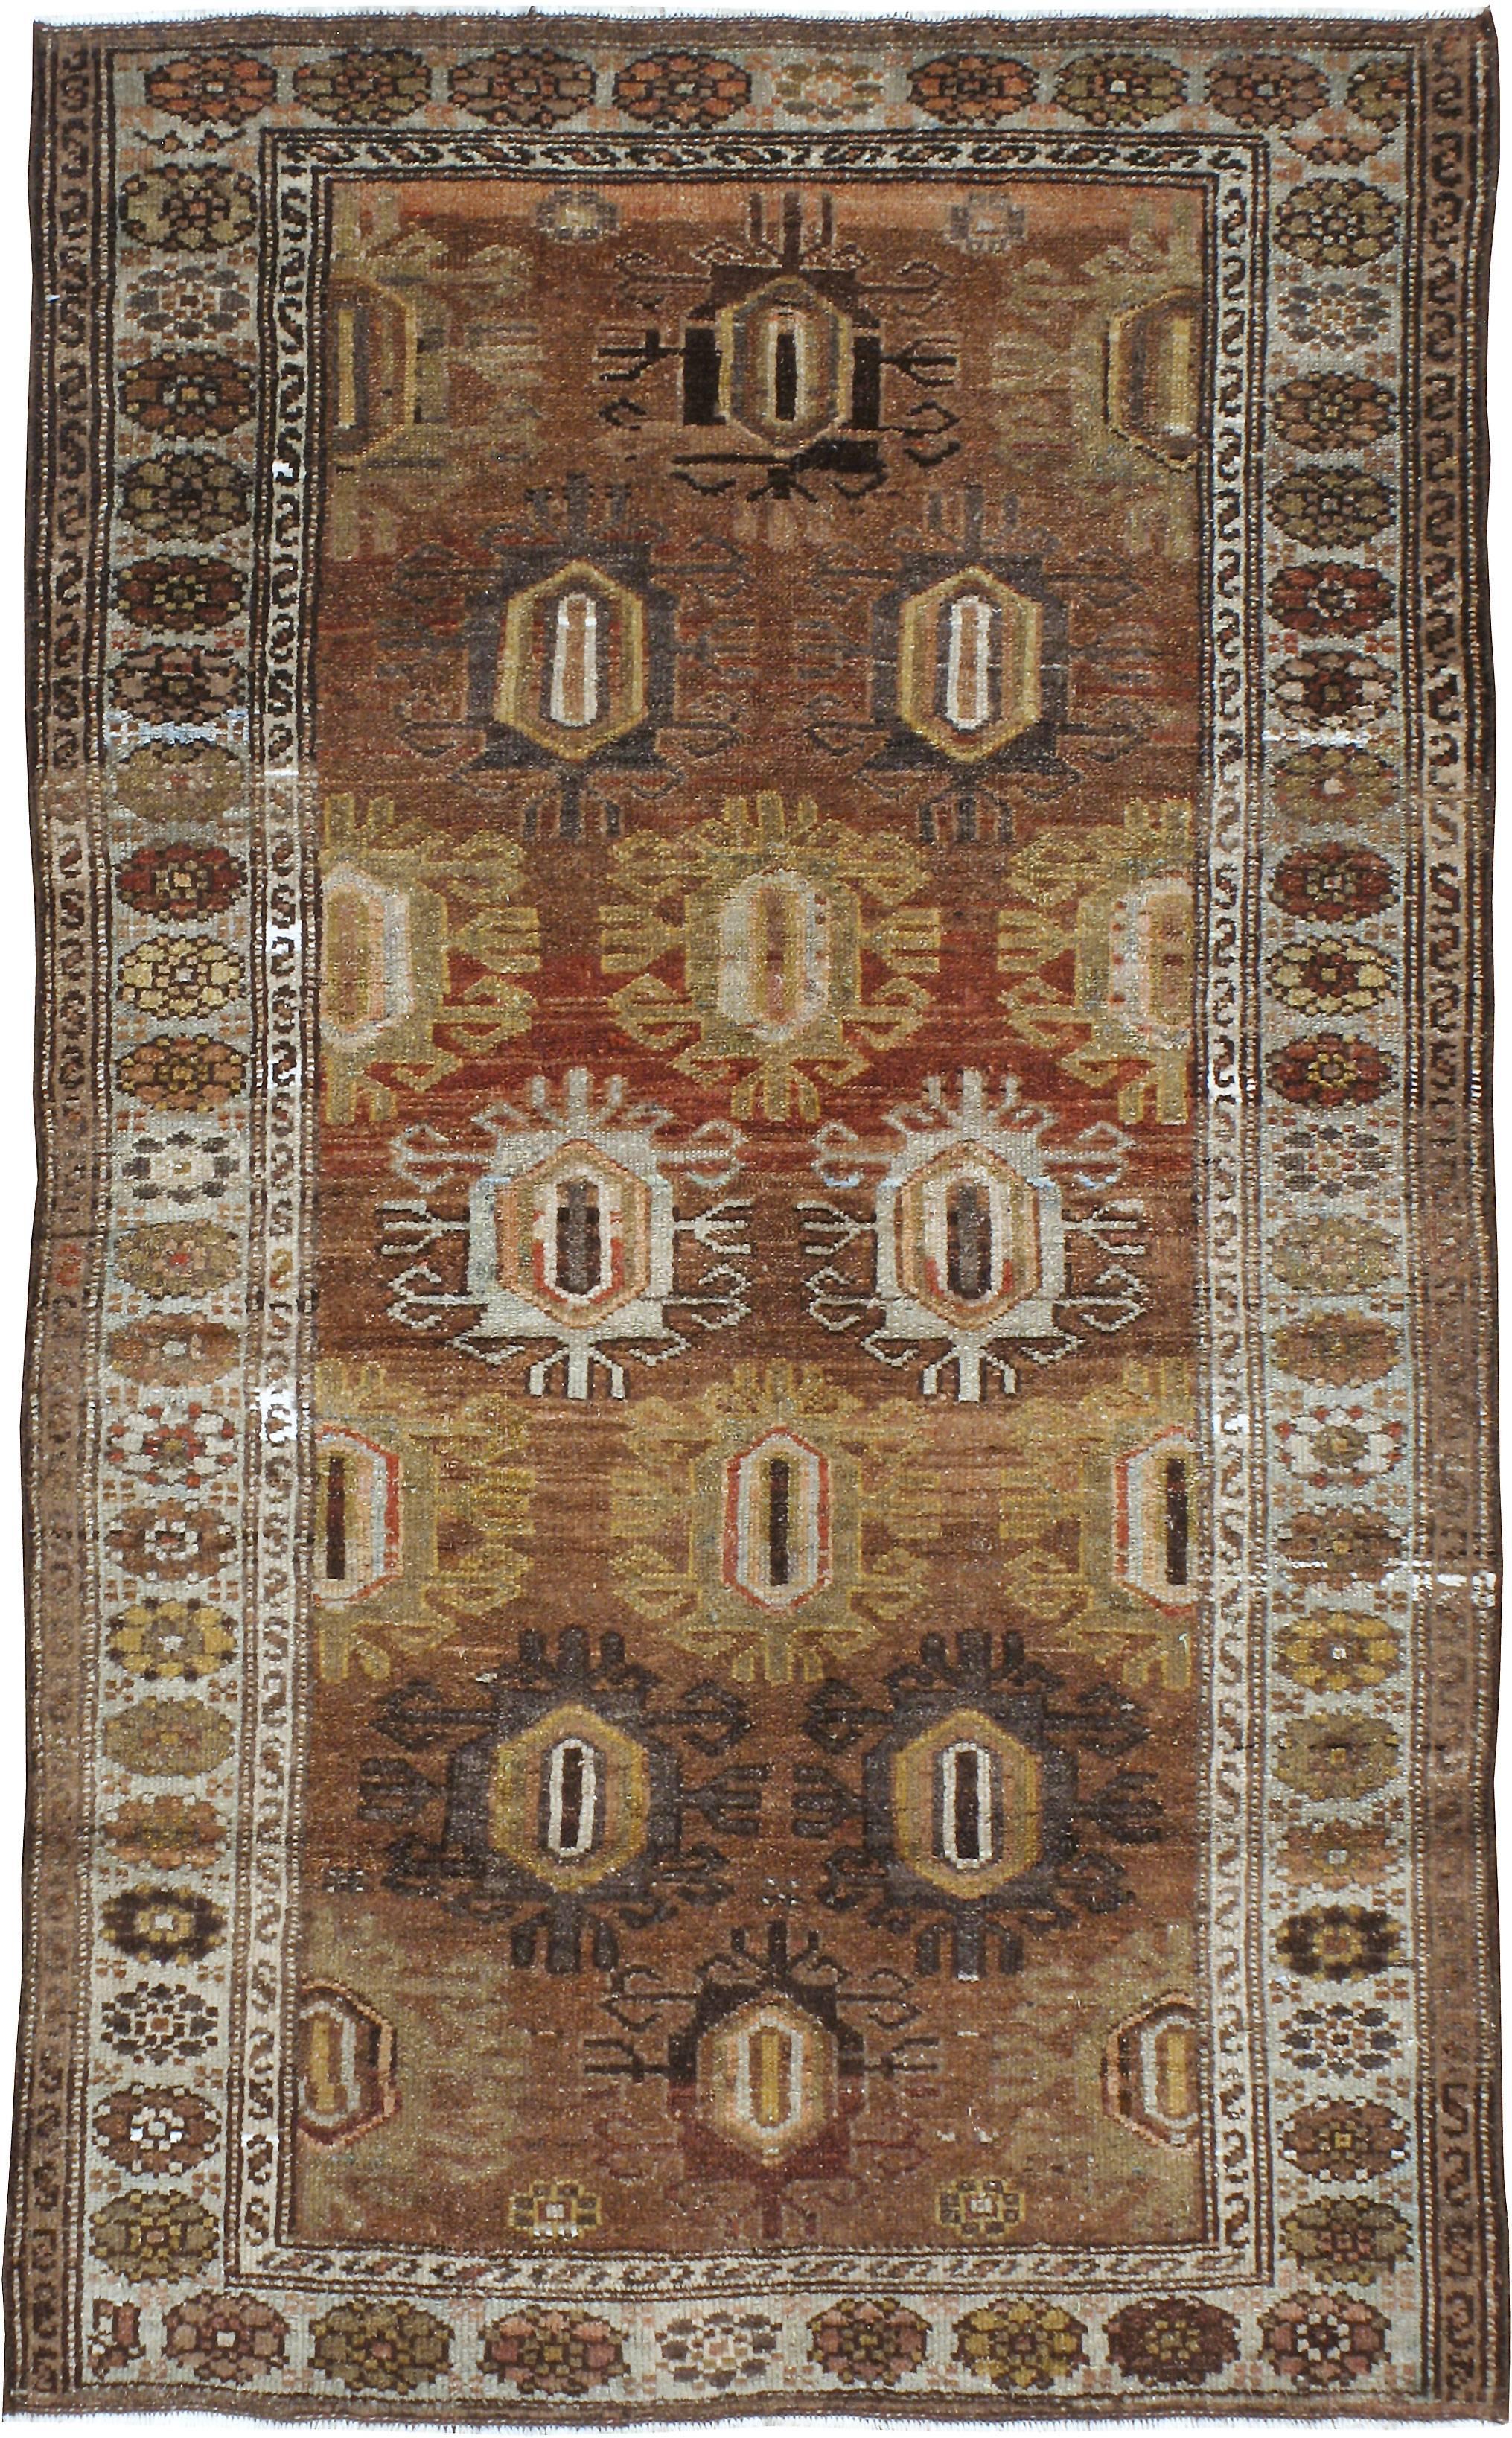 An antique Persian Kurd carpet from the first quarter of the 20th century.